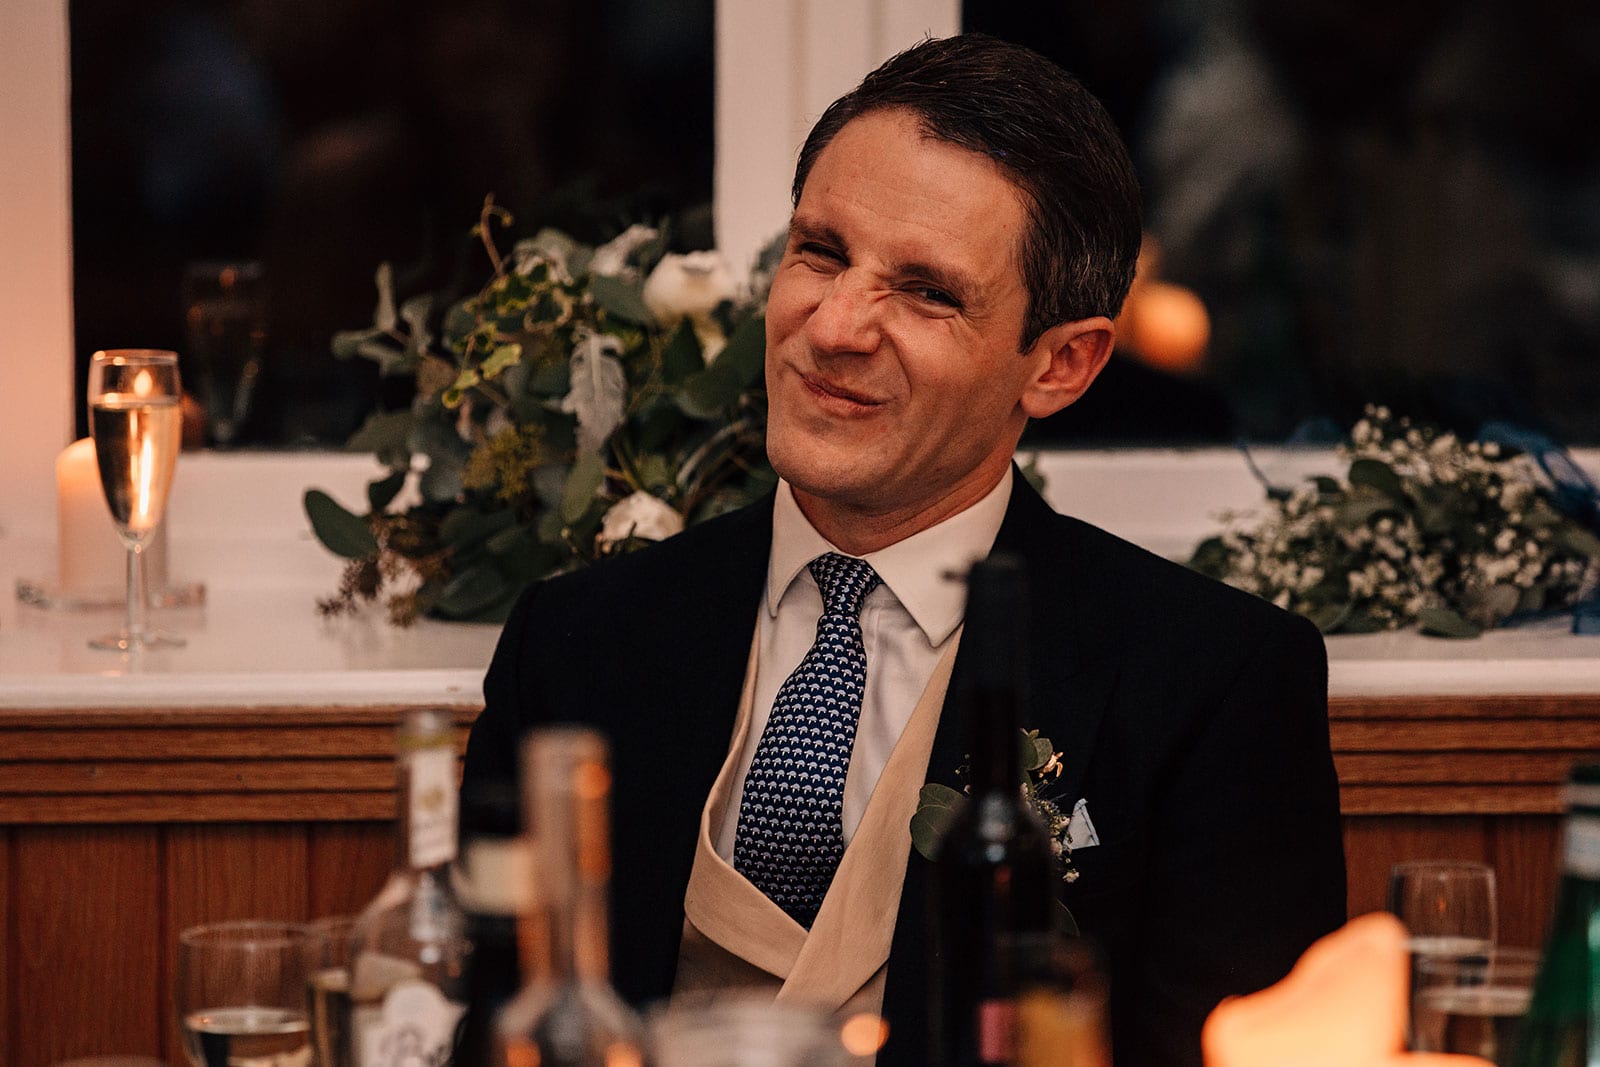 The groom screwing up his face in reaction to the best man's wedding speech